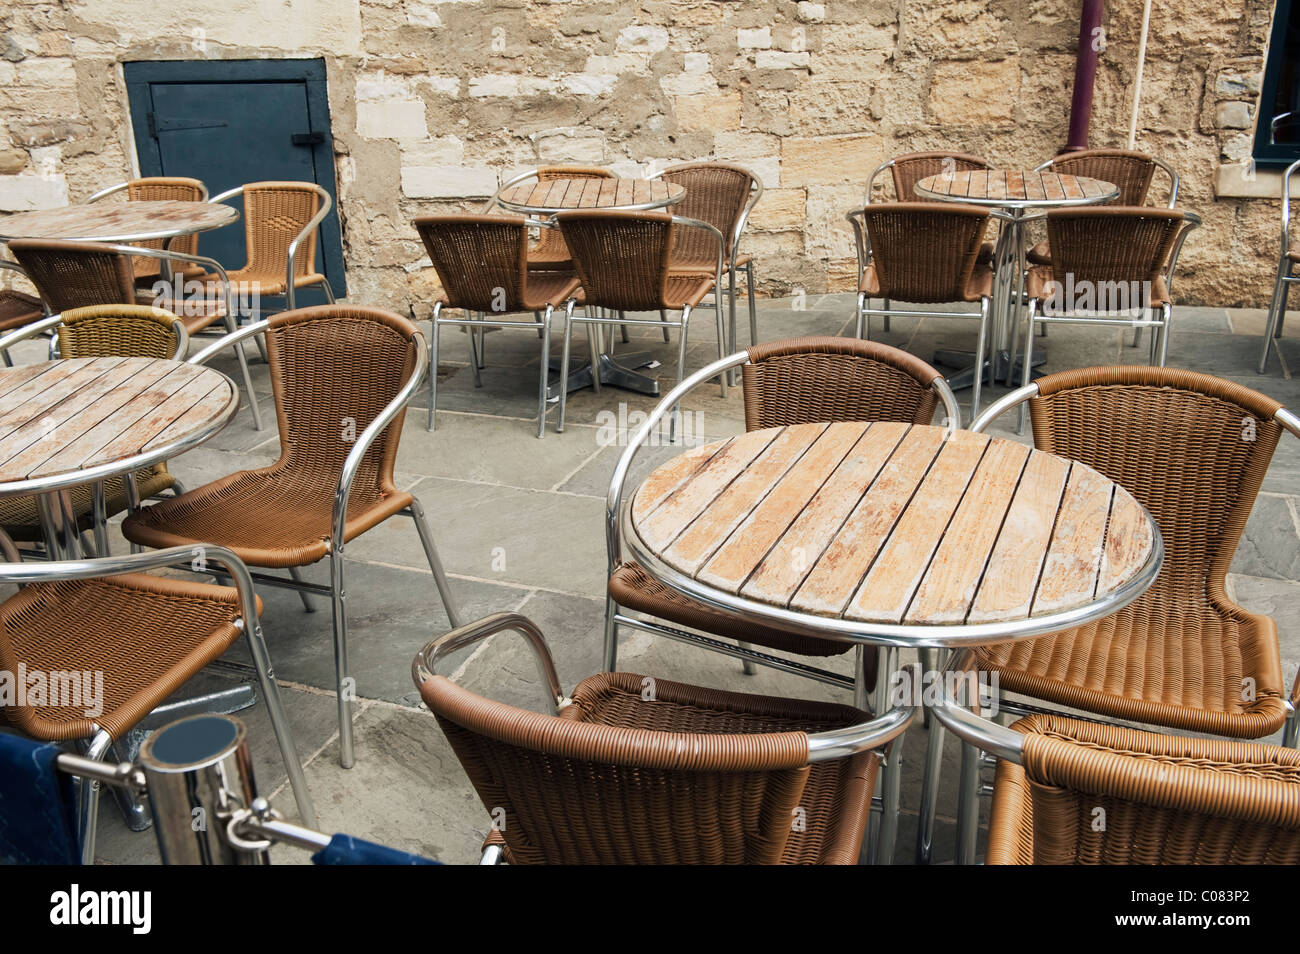 Tables and chairs at an outdoor cafe, Oxford, Oxfordshire, England Stock Photo